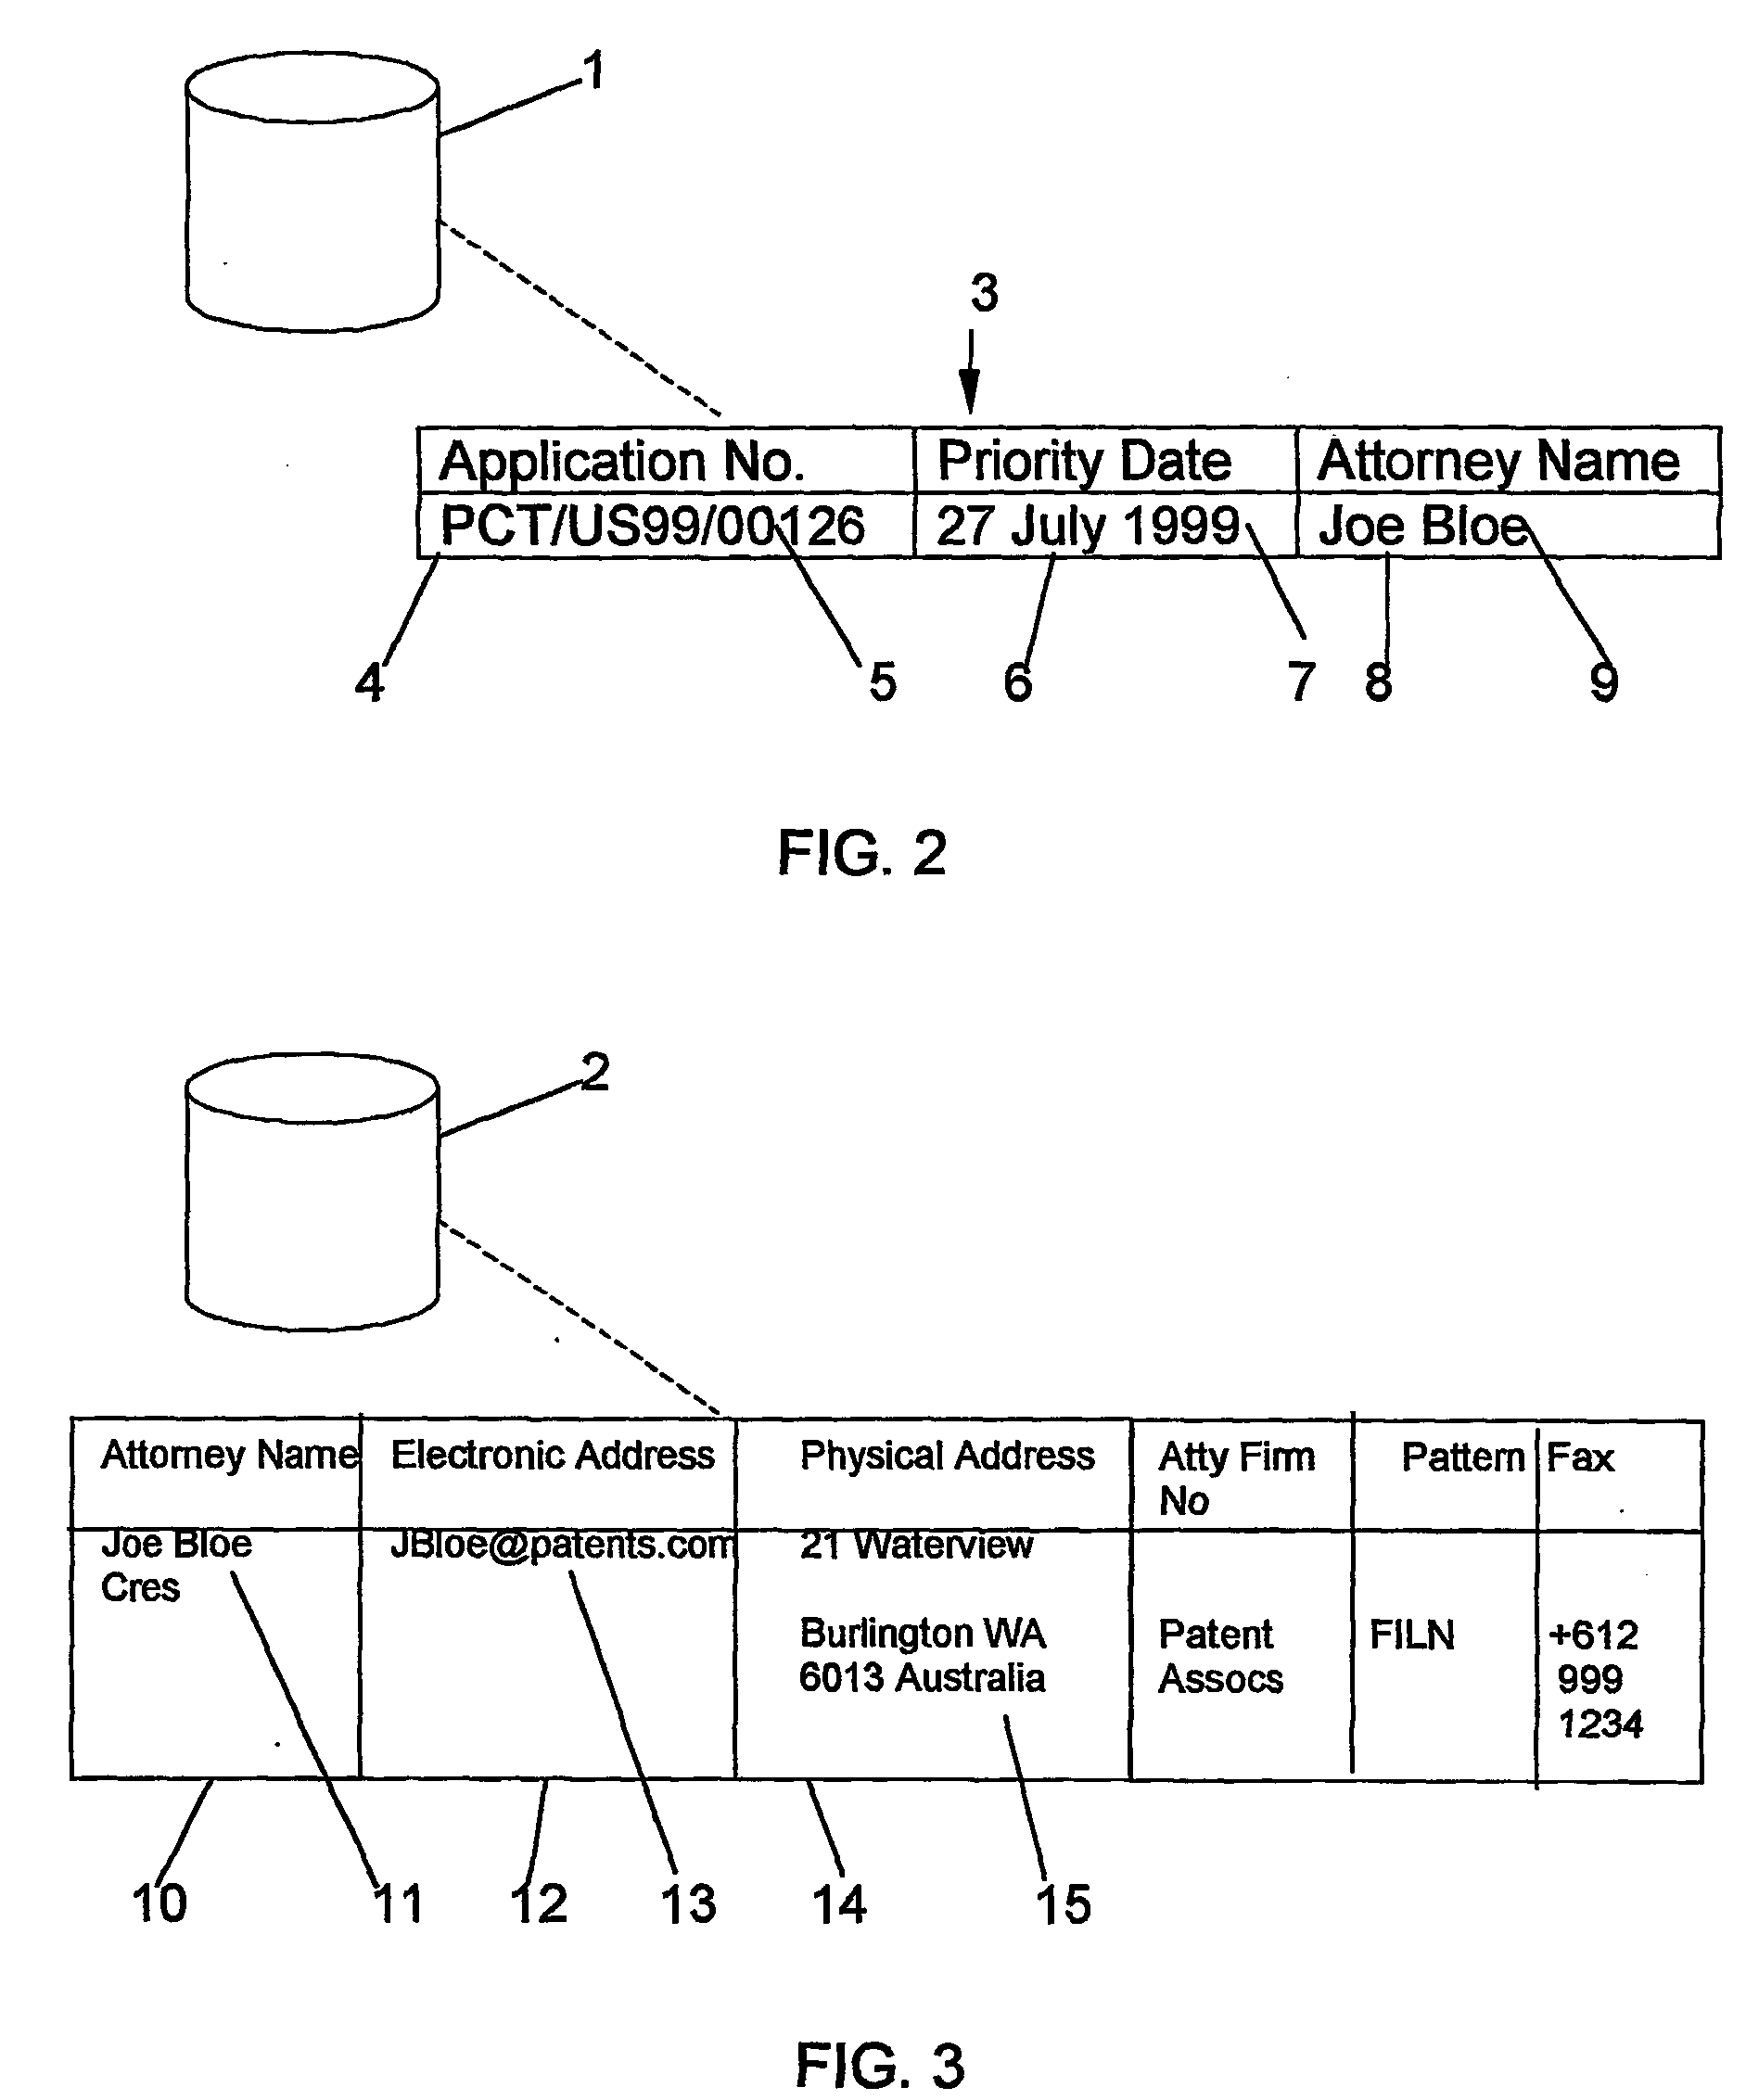 System and method of attracting and lodging pct national phase applications